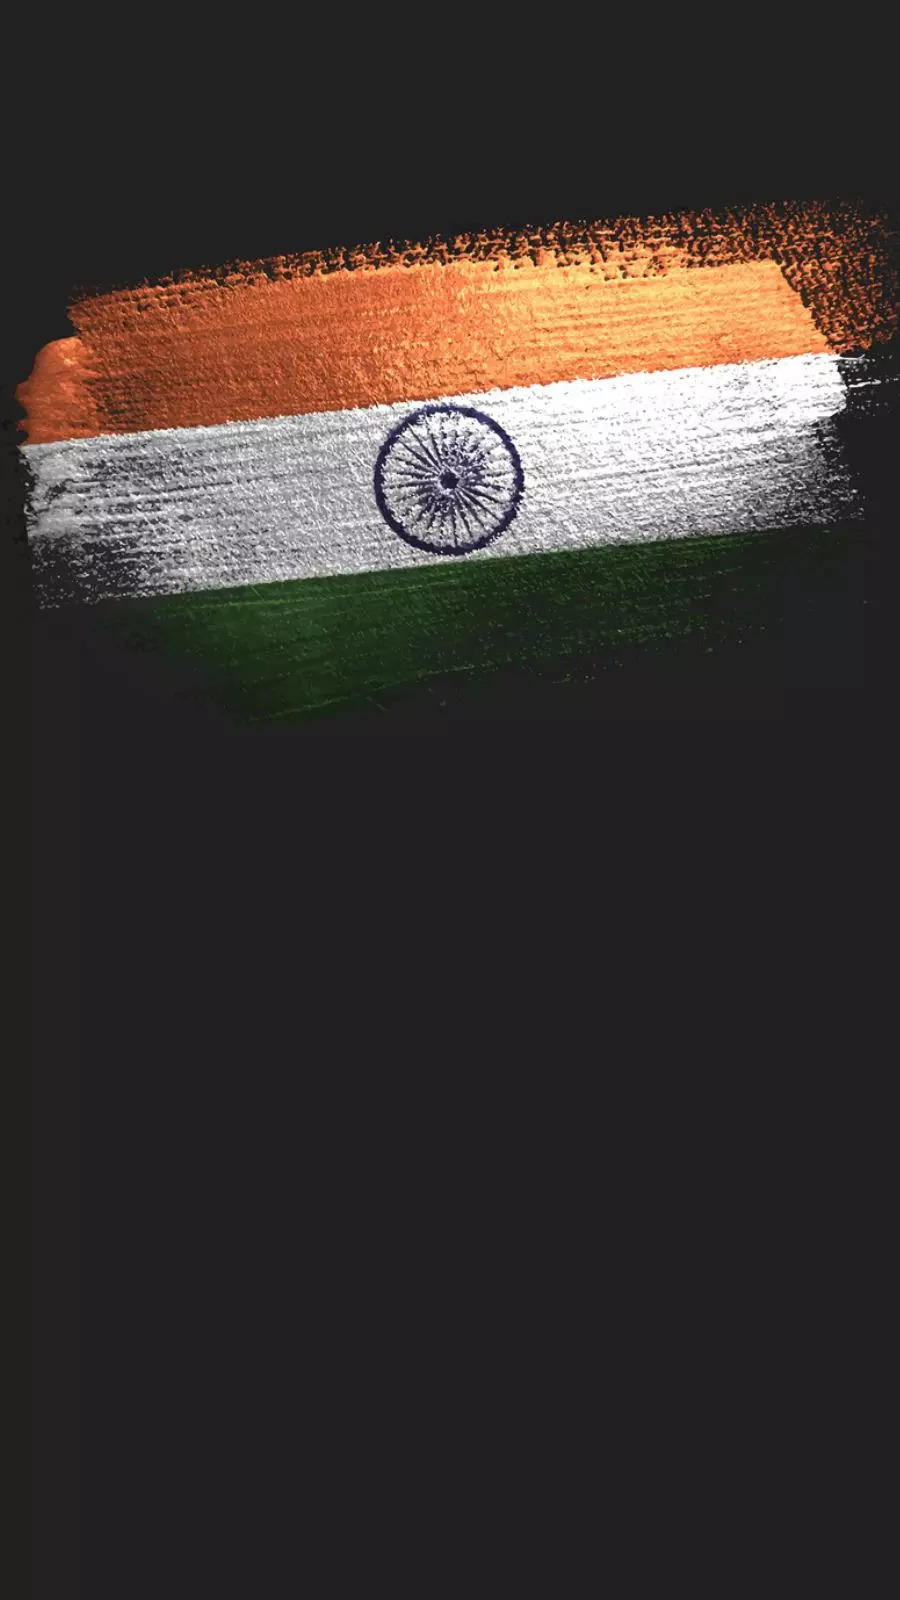 tiranga: Evolution Of The National Flag: Things An Indian Should Know |  EconomicTimes